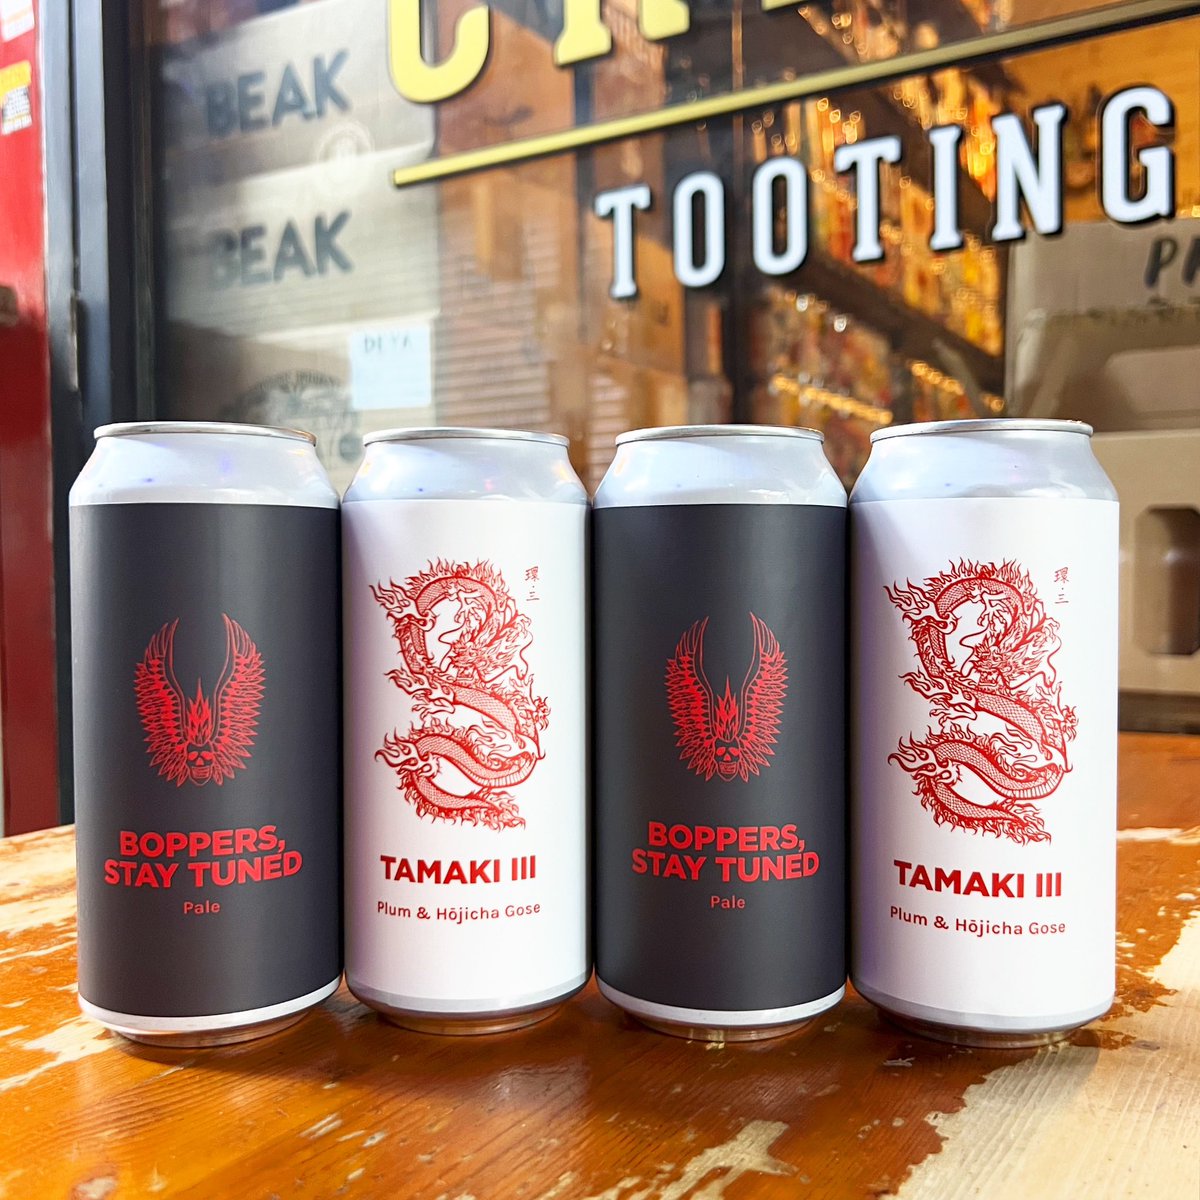 FRESH Pomona Island 🤩 ‘Boppers, Stay Tuned’ DDH Pale with Citra Cryo, Sabro and Mosaic 🤤 PLUS ‘Tamaki III’ Juicy Plum #Sour with grilled Hōjicha Tea from Bohea Teas 🇯🇵🍺 
.
.
.
#Craft #Tooting #Craftbeer  #Bar & #BottleShop open late! #BroadwayMarket #TootingBroadway #beers